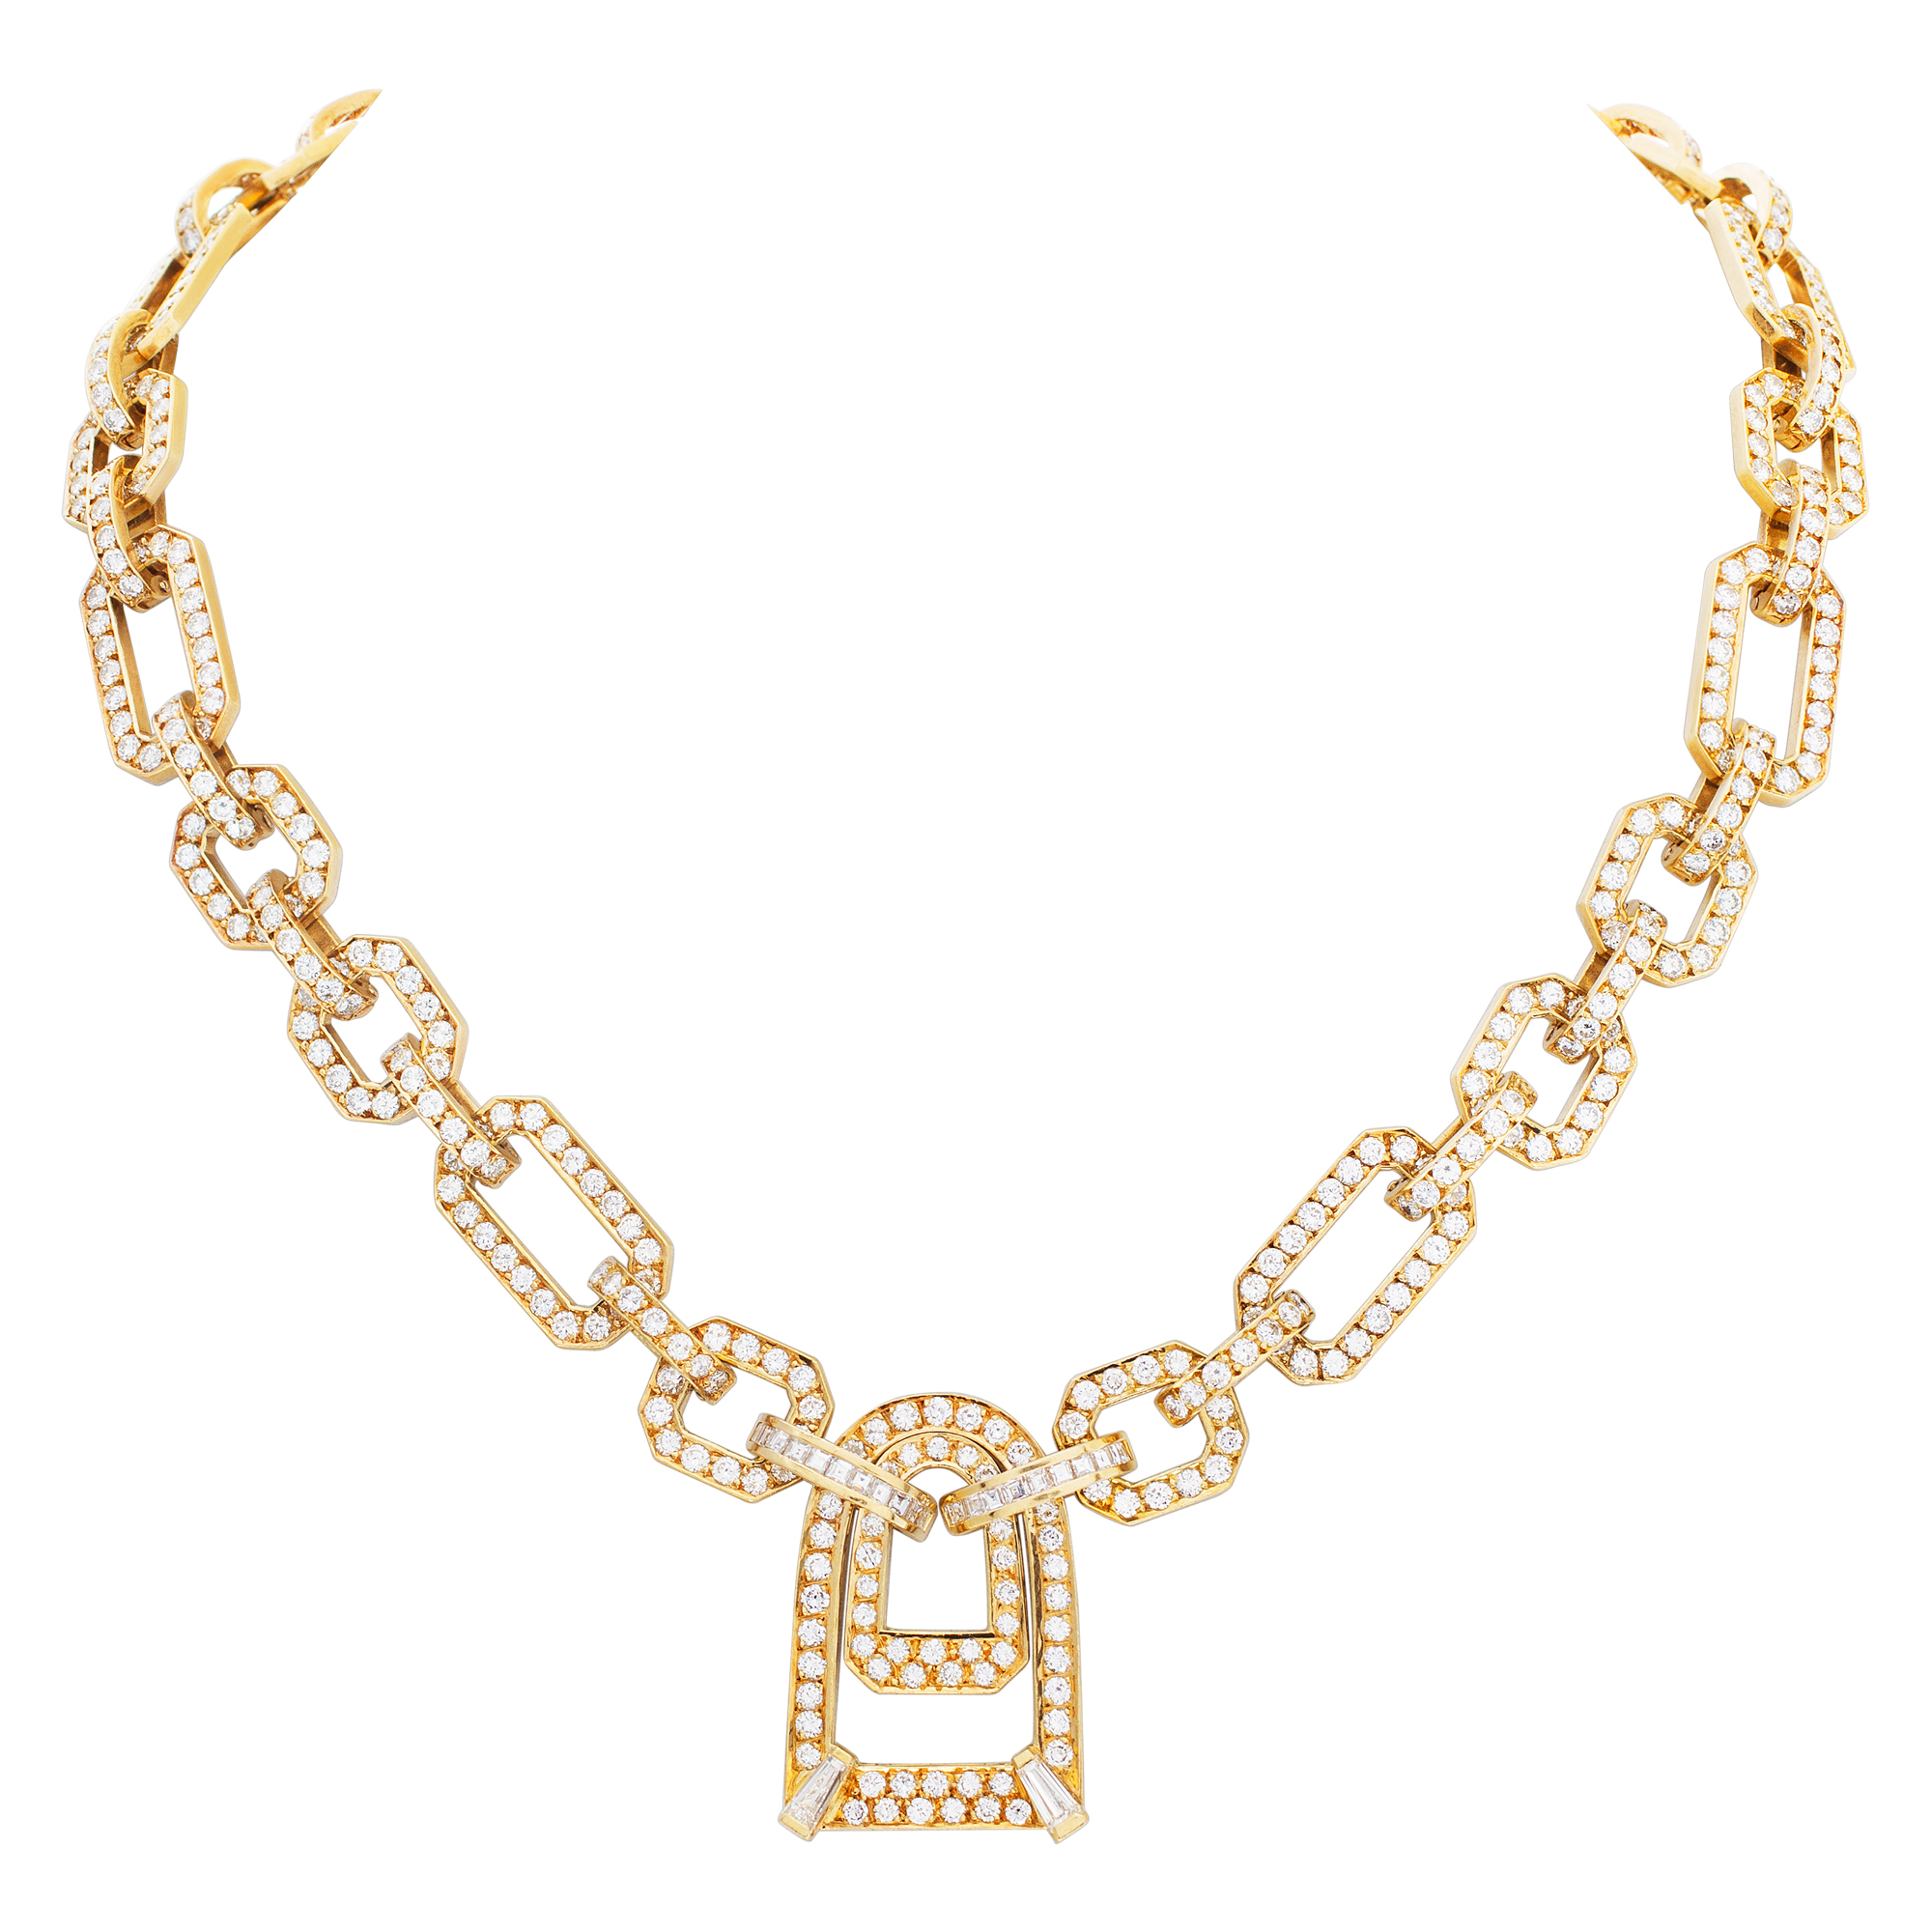 Geometric sparkling necklace with approx. 14 carats, full cut round brilliant and baguette diamond set in 18K yelllow gold image 1